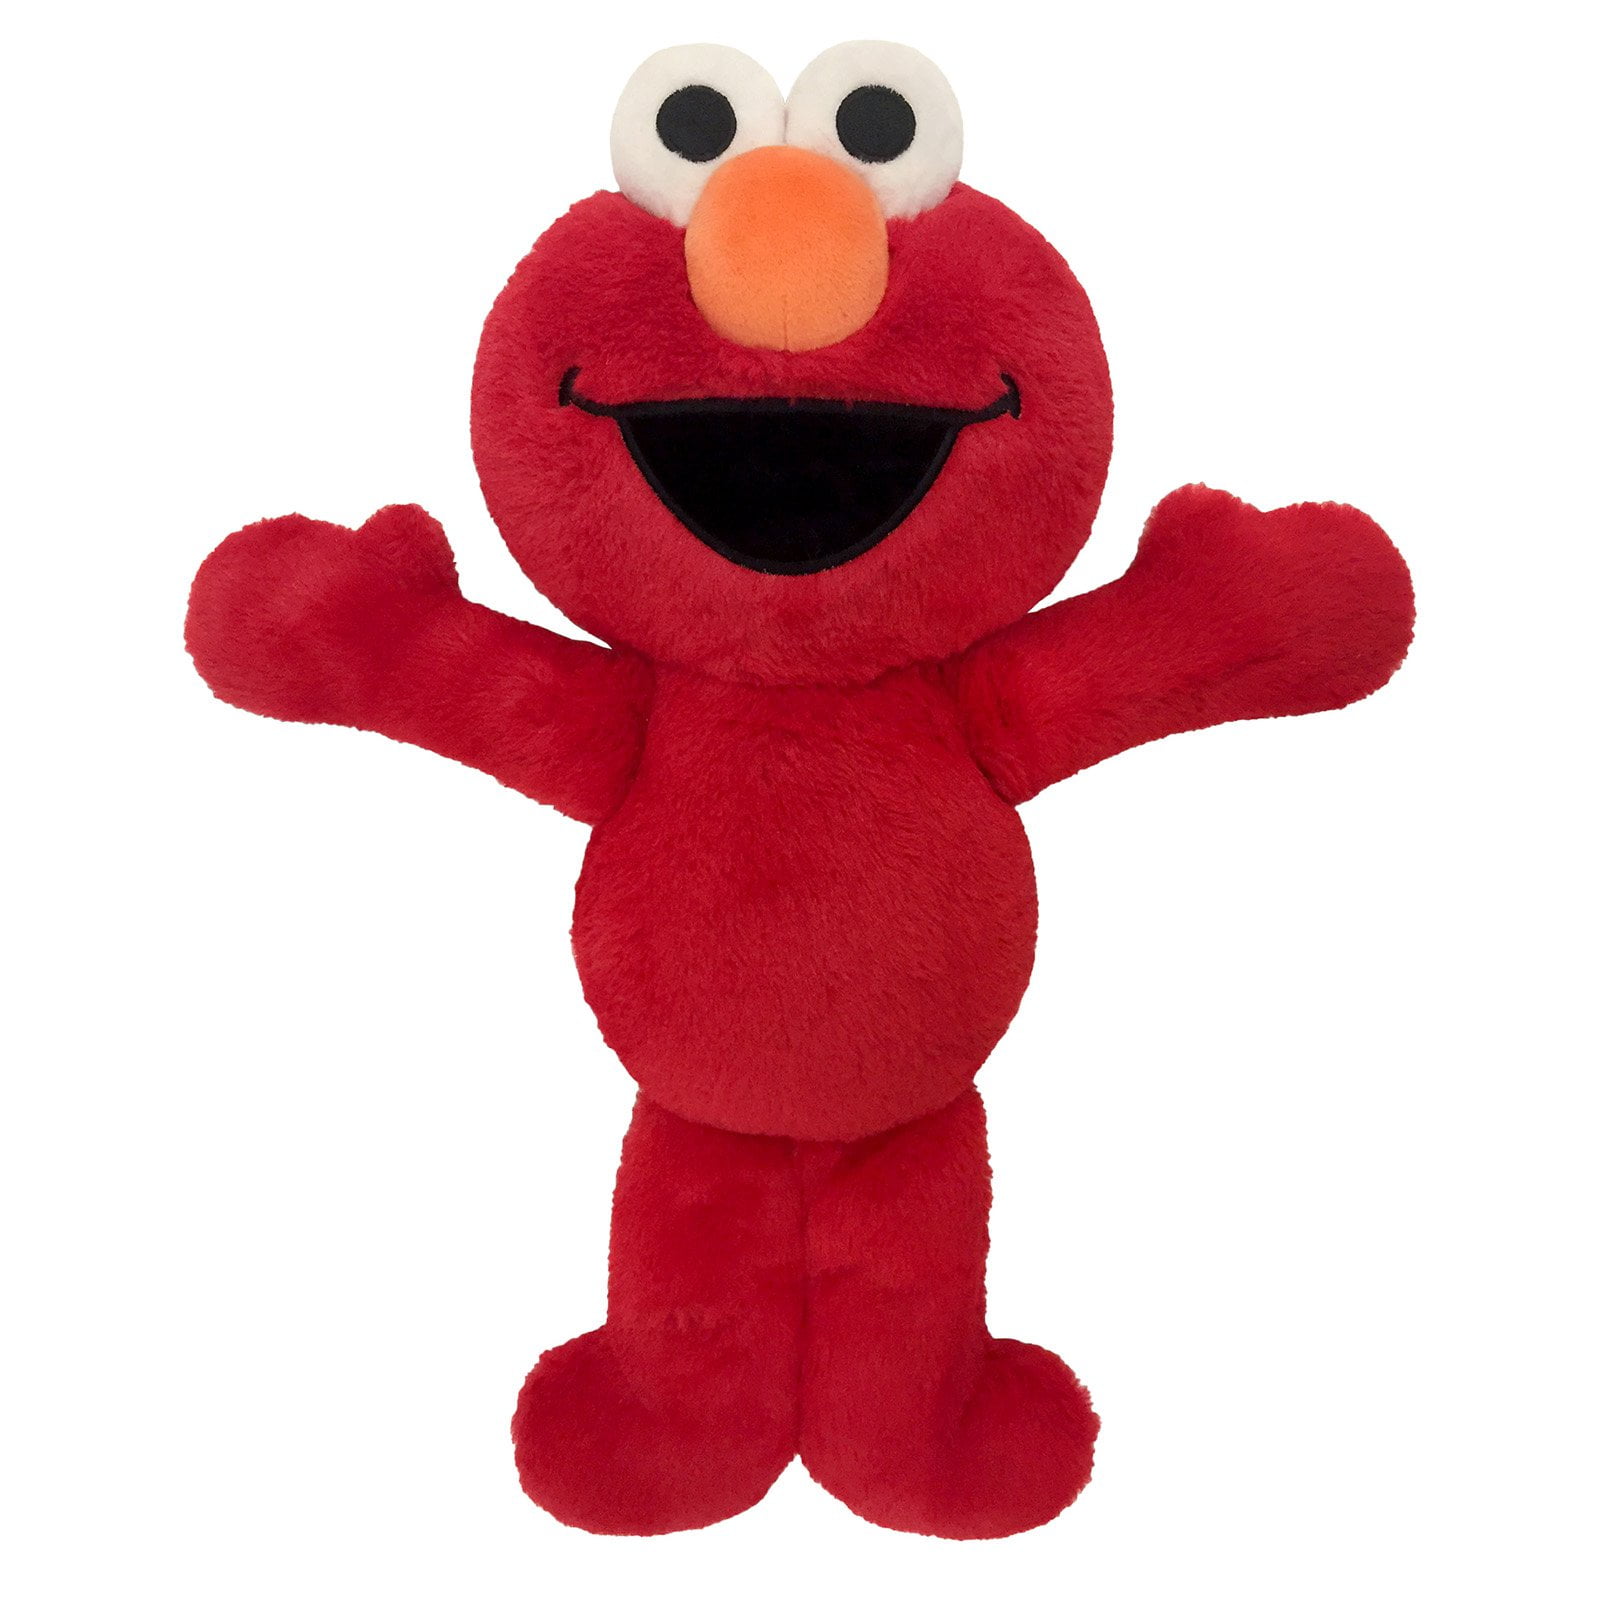 Weighted stuffed animal 3 lbs Elmo washable weighted buddy